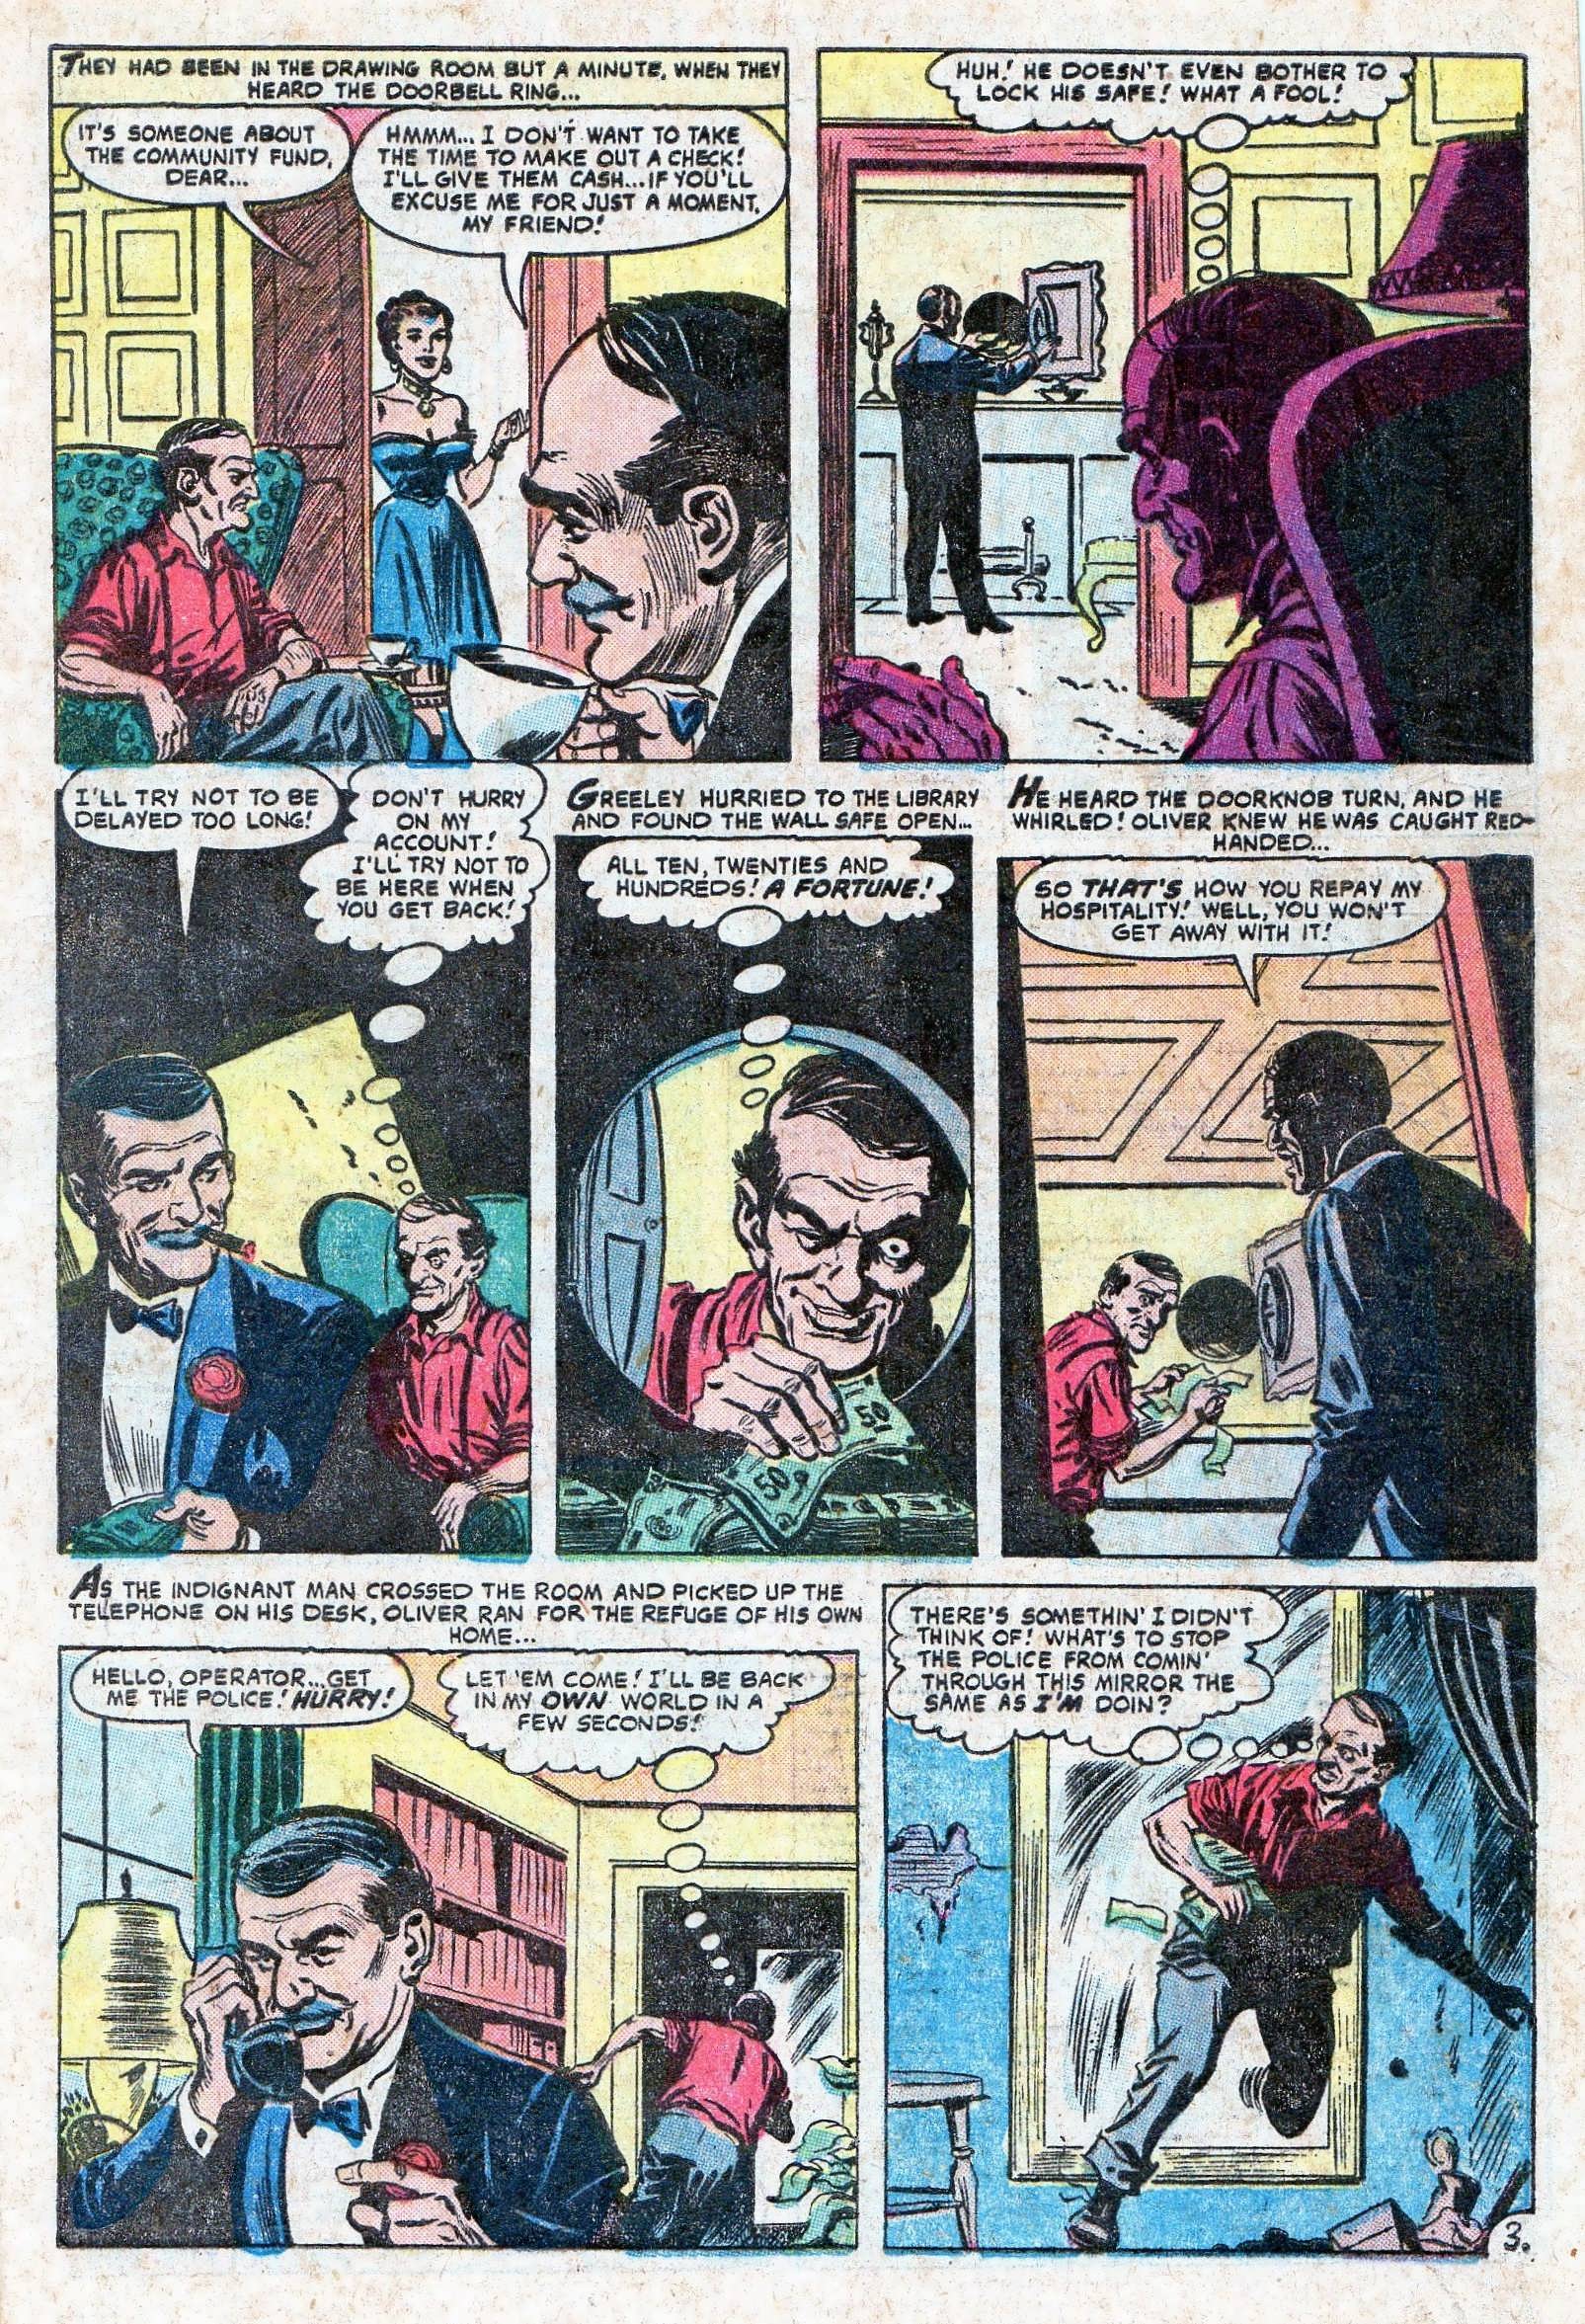 Marvel Tales (1949) 155 Page 4